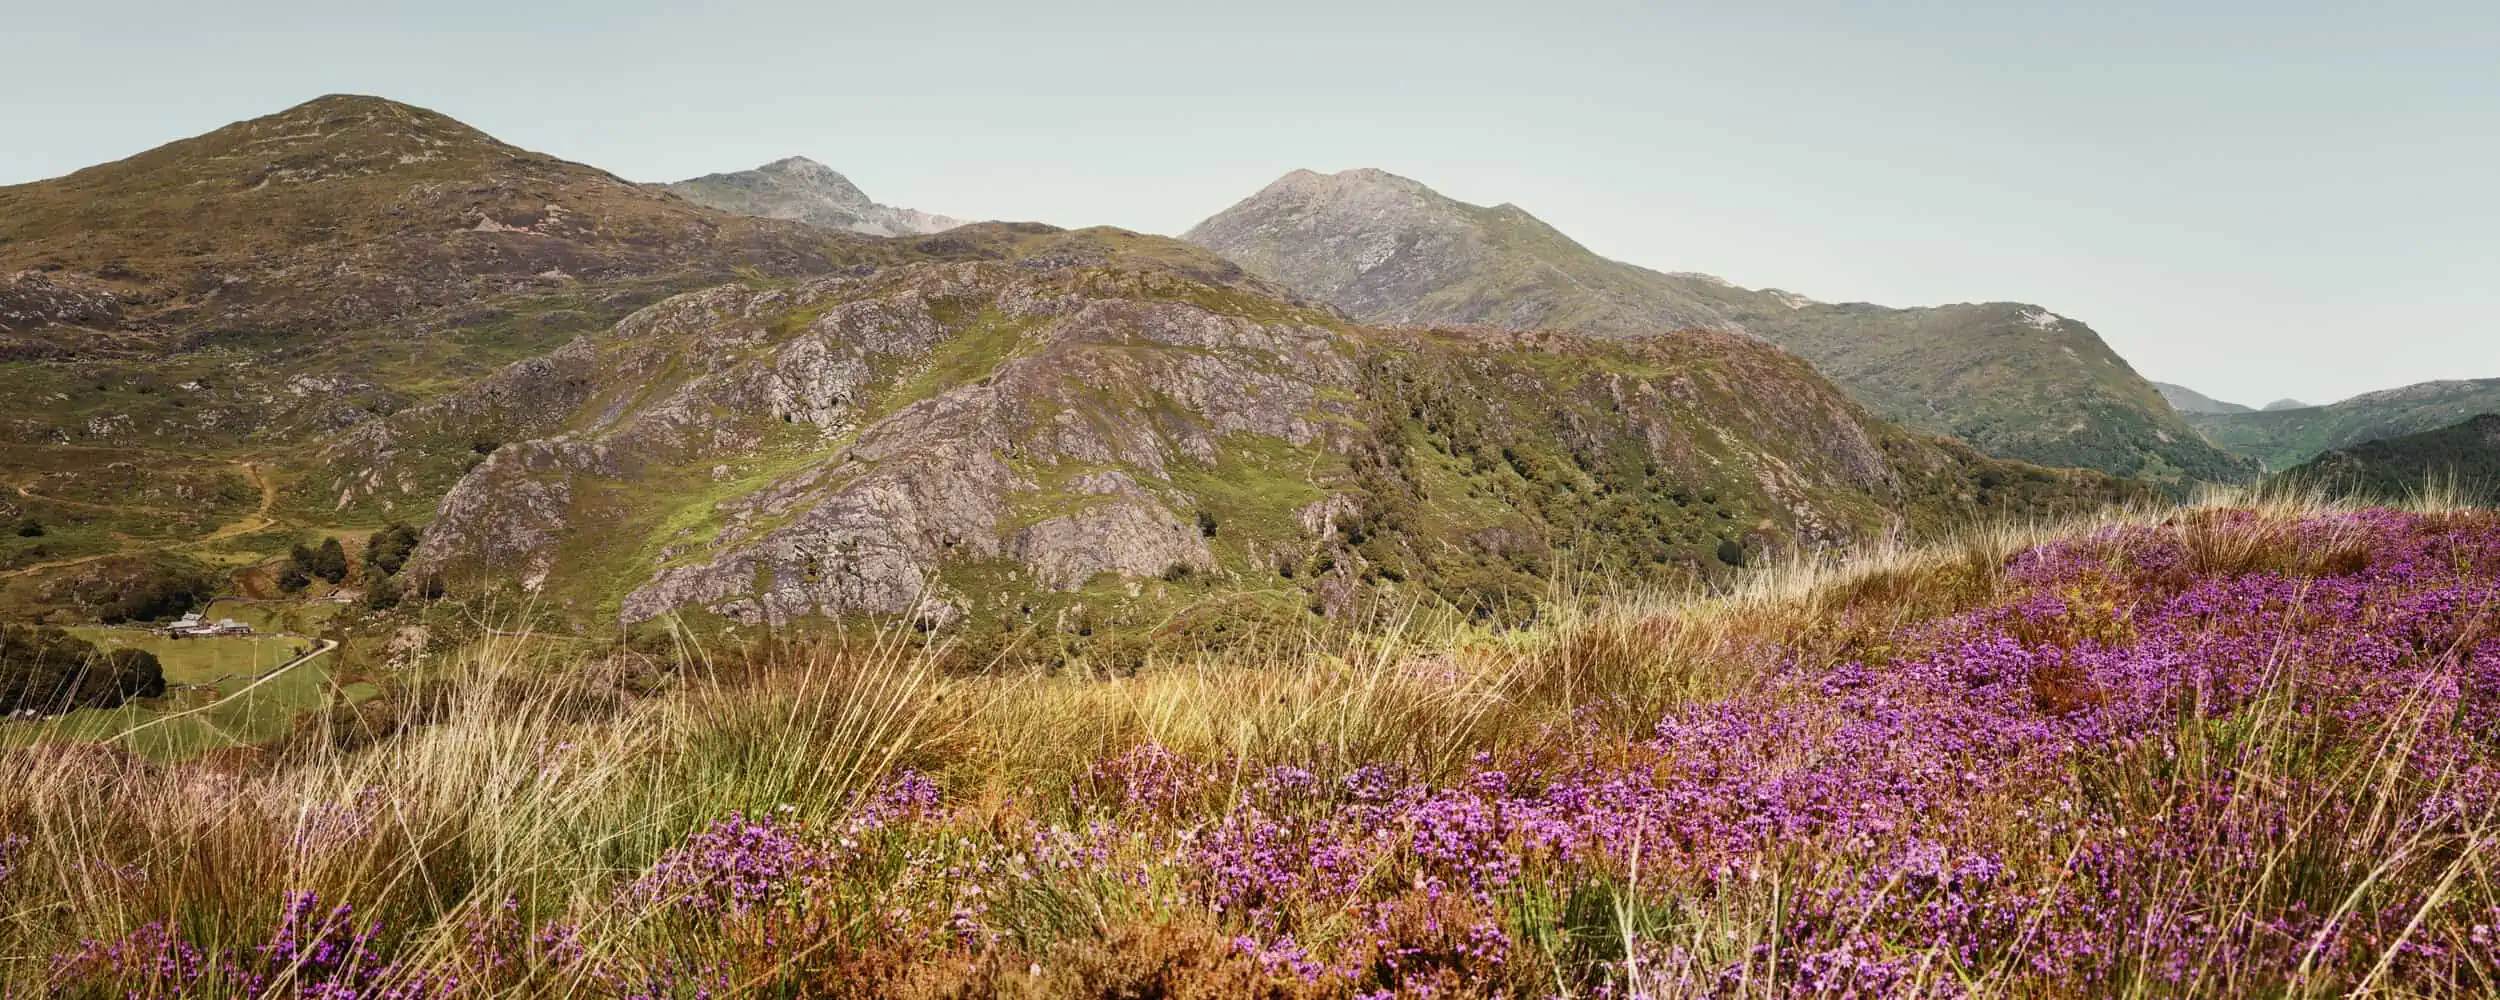 ID: A landscape panorama image. The scene is bright and it is summer. The foreground contains rocky outcrops with pink mountain flowers. In the mid ground is a layer of green mountain slope. In the background are taller mountains - with summer colours of greens, and grey and mineral colours of red being brought out of the rock. The sky is fully blue, with not a cloud in sight - but is very pale.